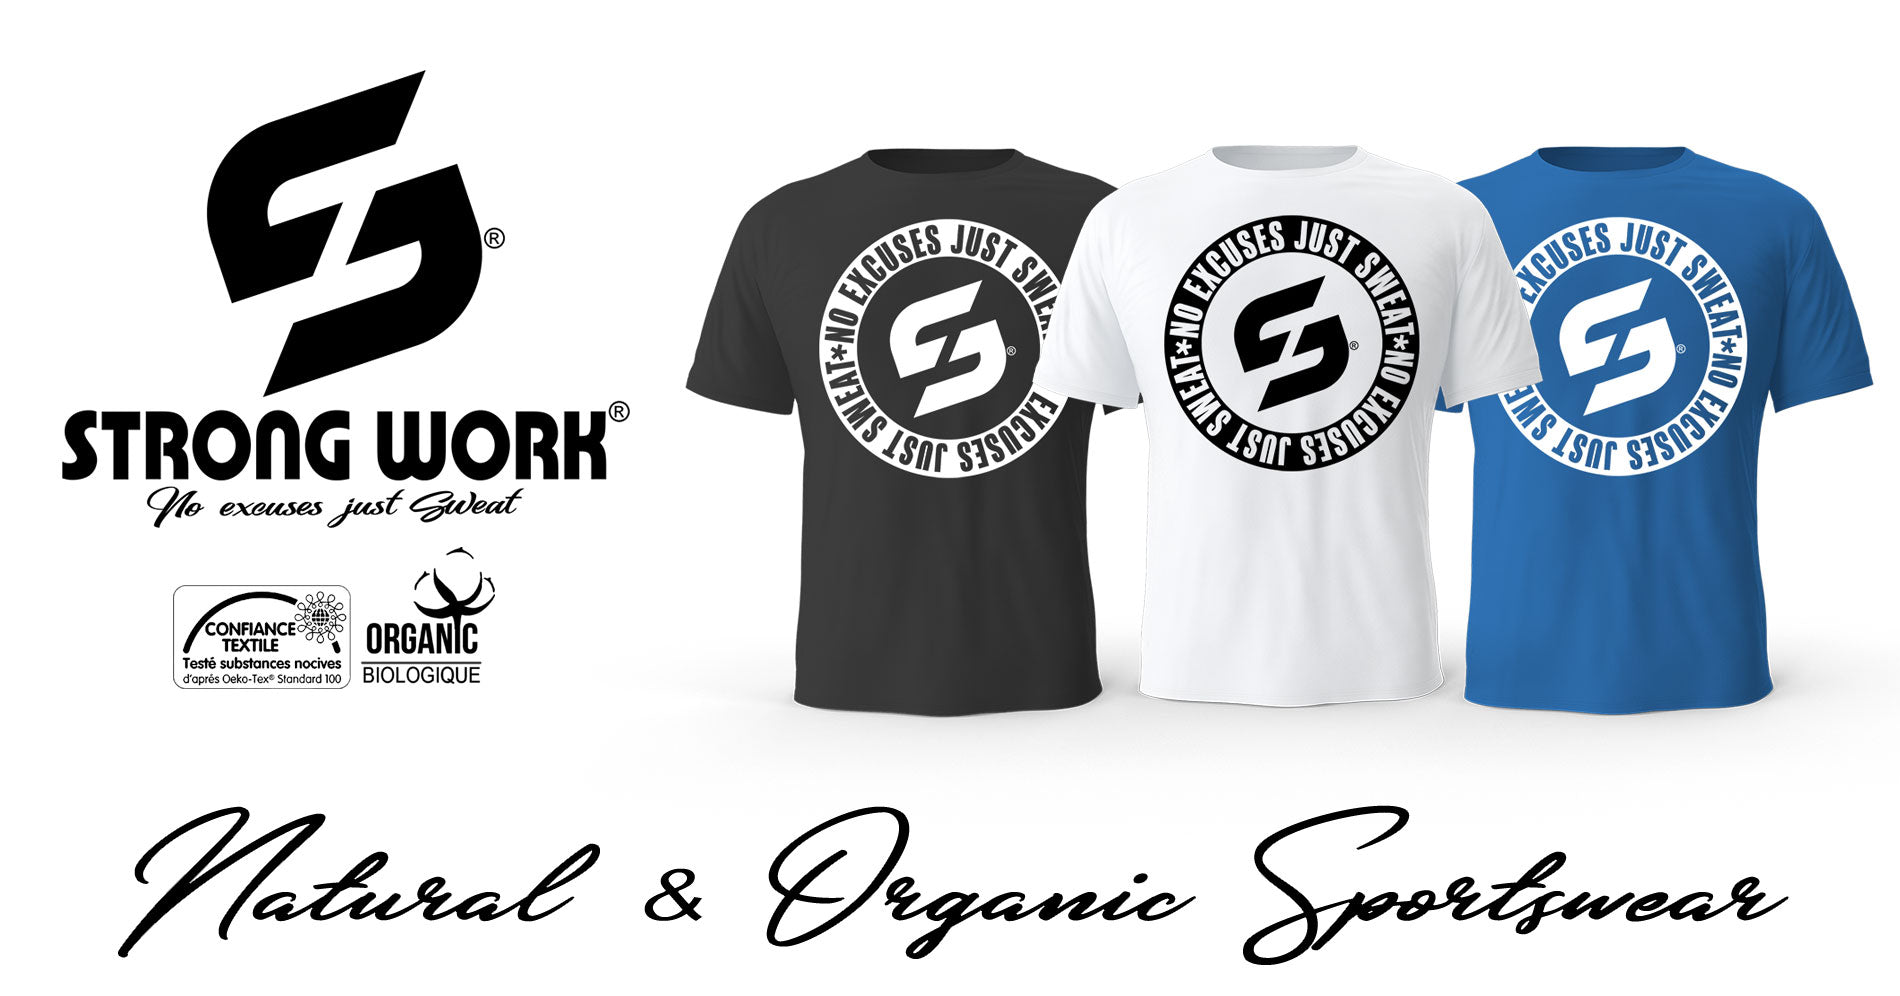 STRONG WORK SPORTSWEAR - NO EXCUSES JUST SWEAT BLACK EDITION T-SHIRT FOR WOMEN